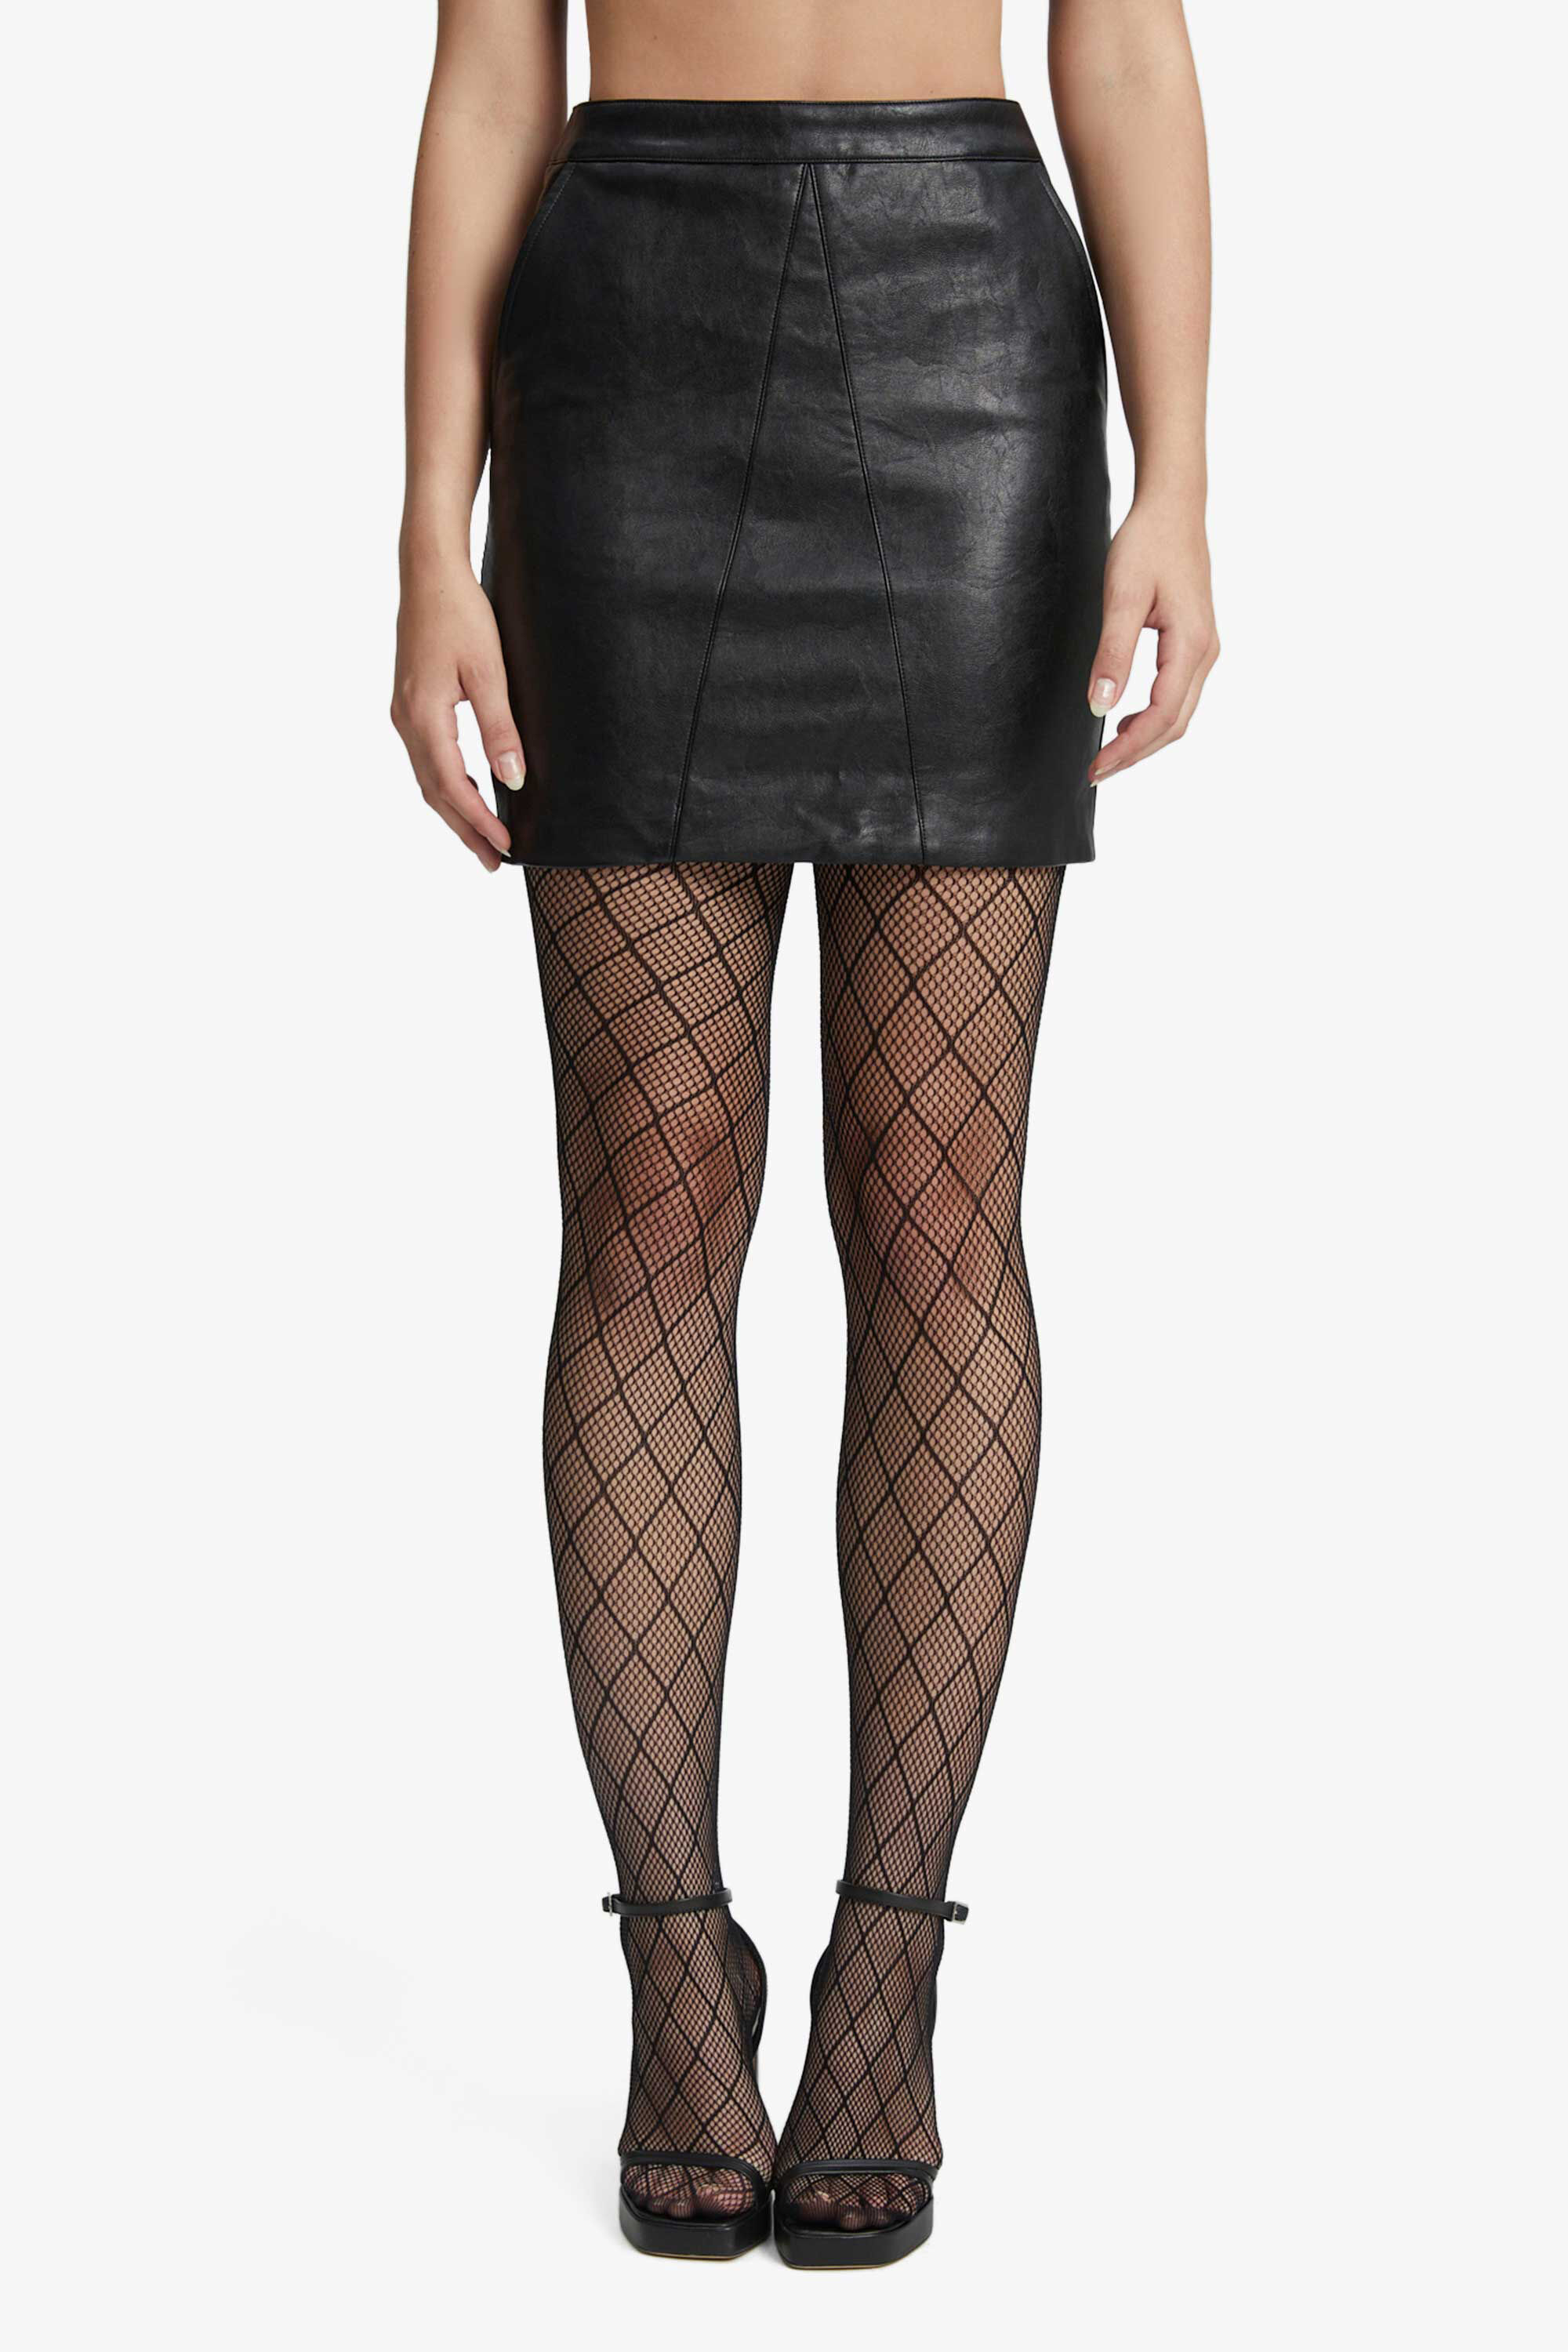 Aristoc on X: So it may not be the party week we had planned - but our  diamond tights are designed to add a stylish mock fishnet to your look for  any